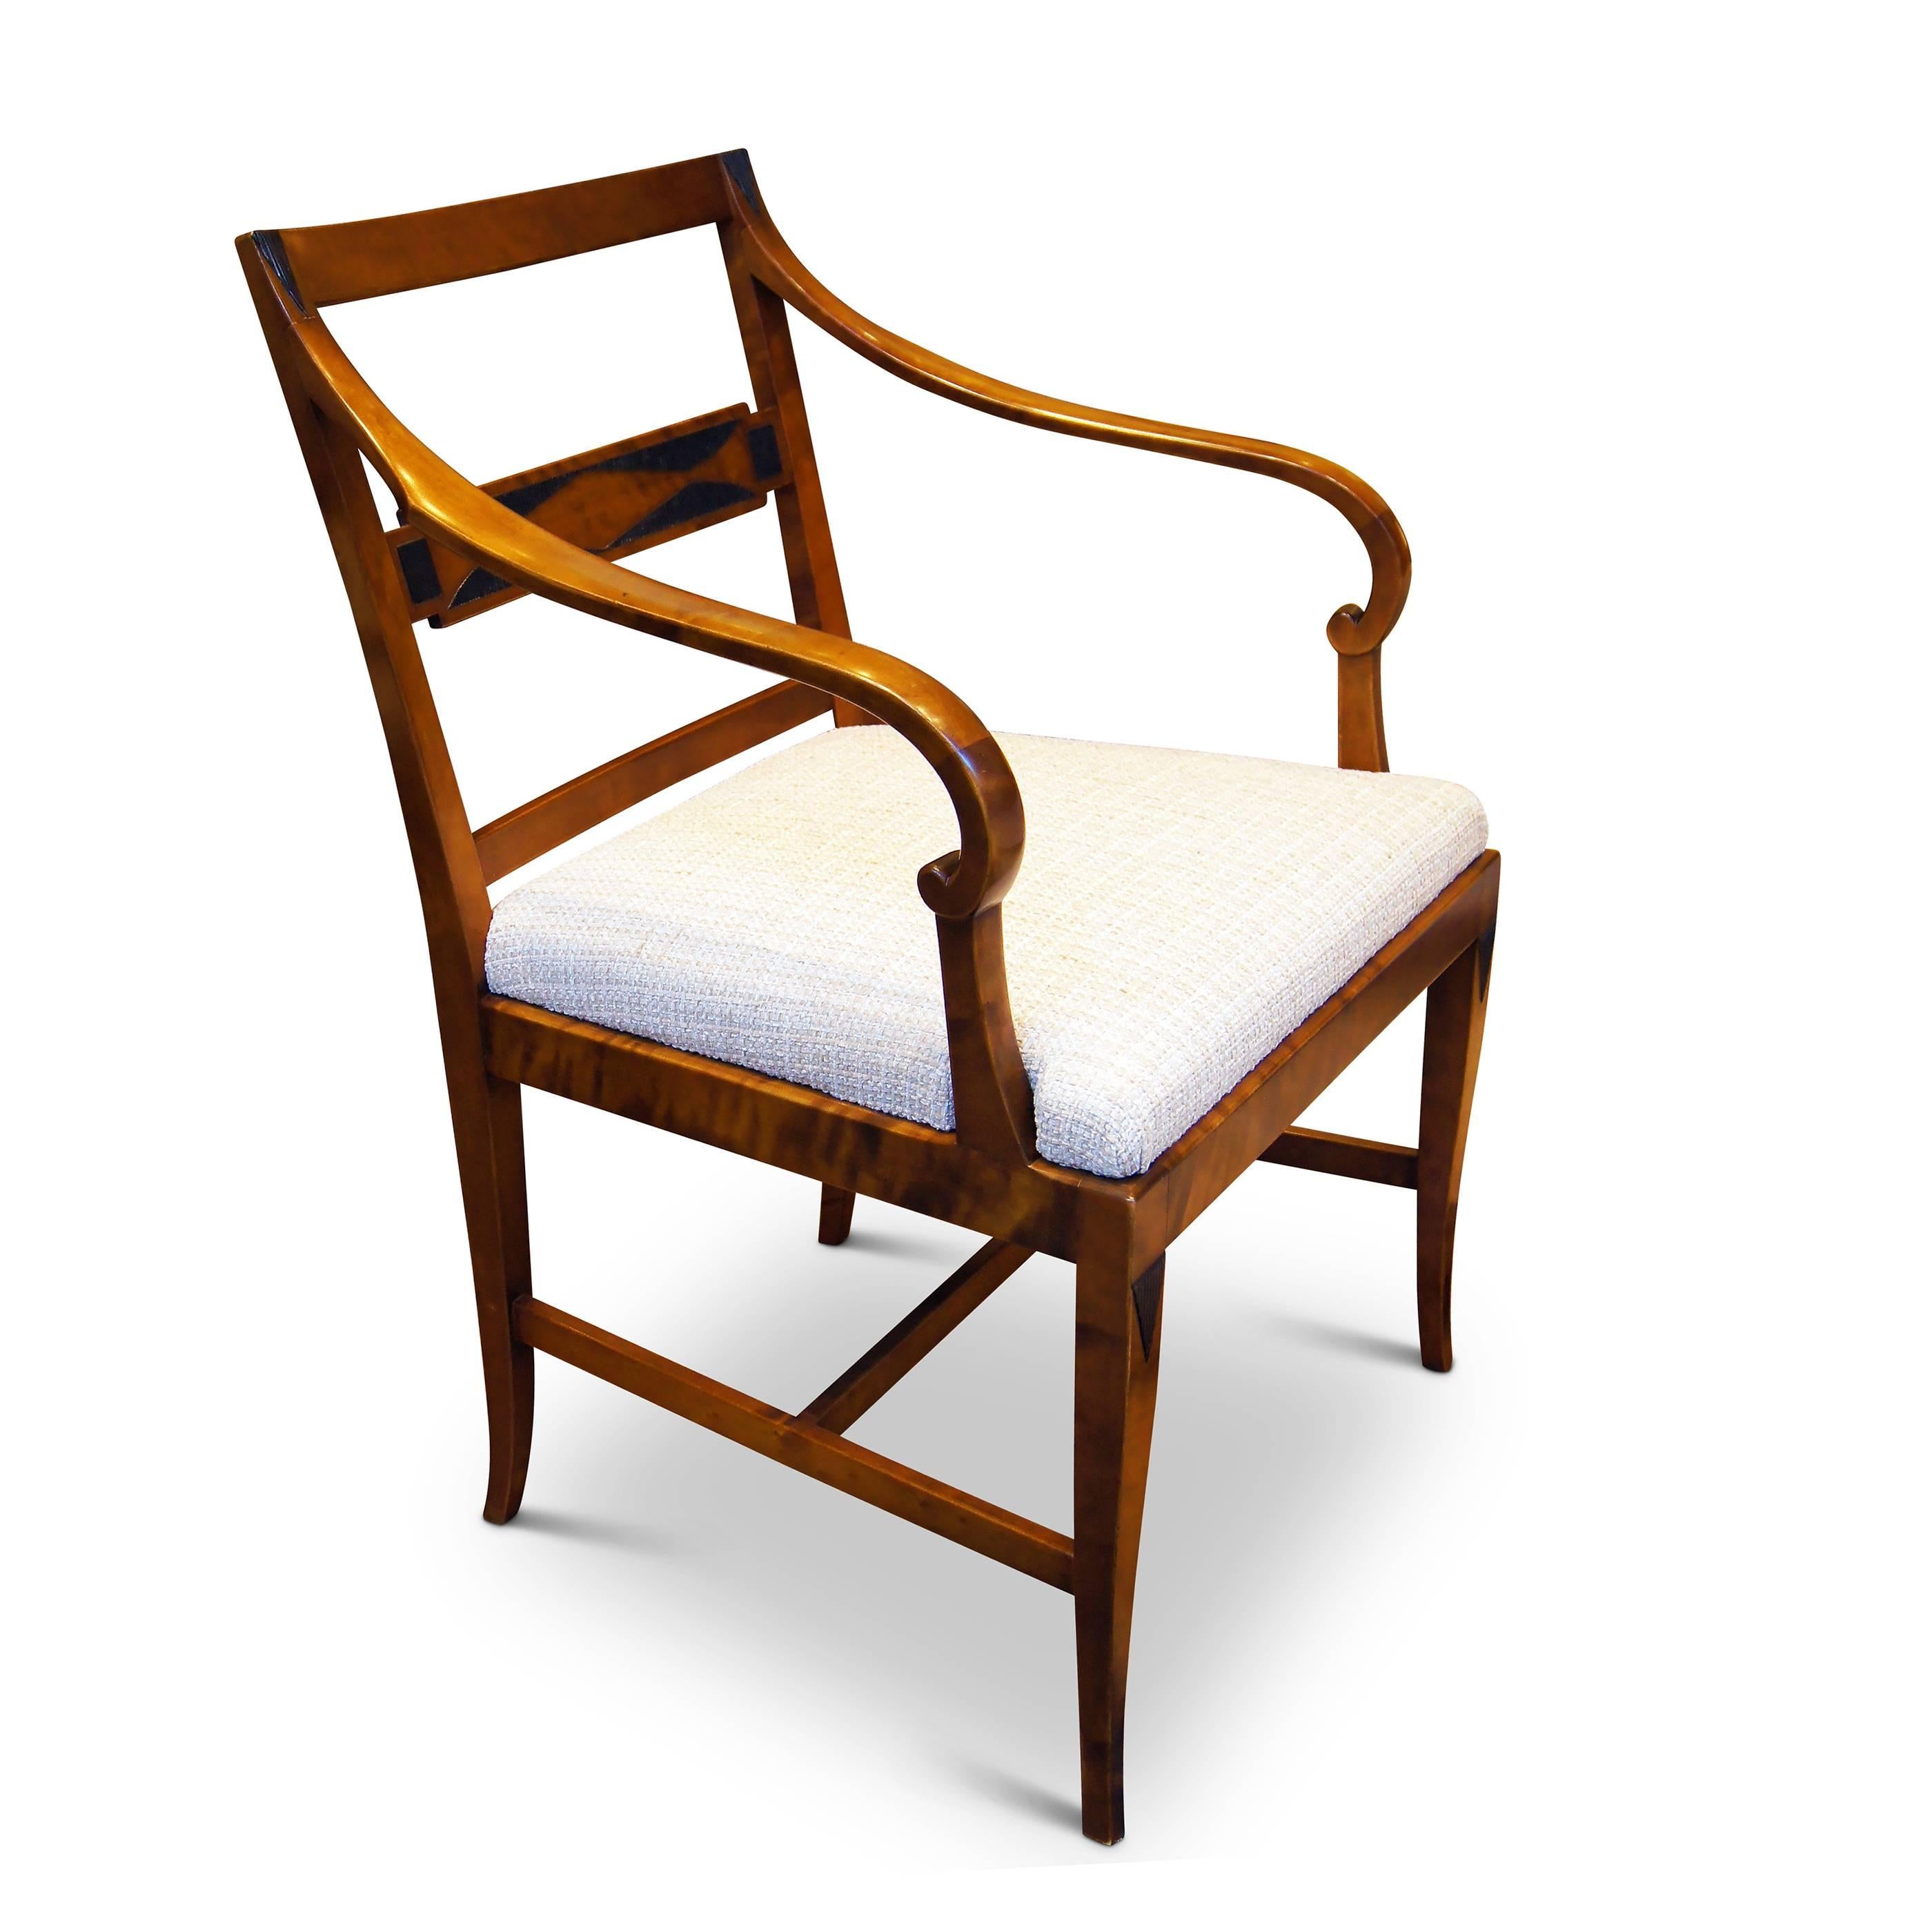 Swedish Pair of Art Deco Modern Classicism Armchairs in Birch by Carl Malmsten For Sale